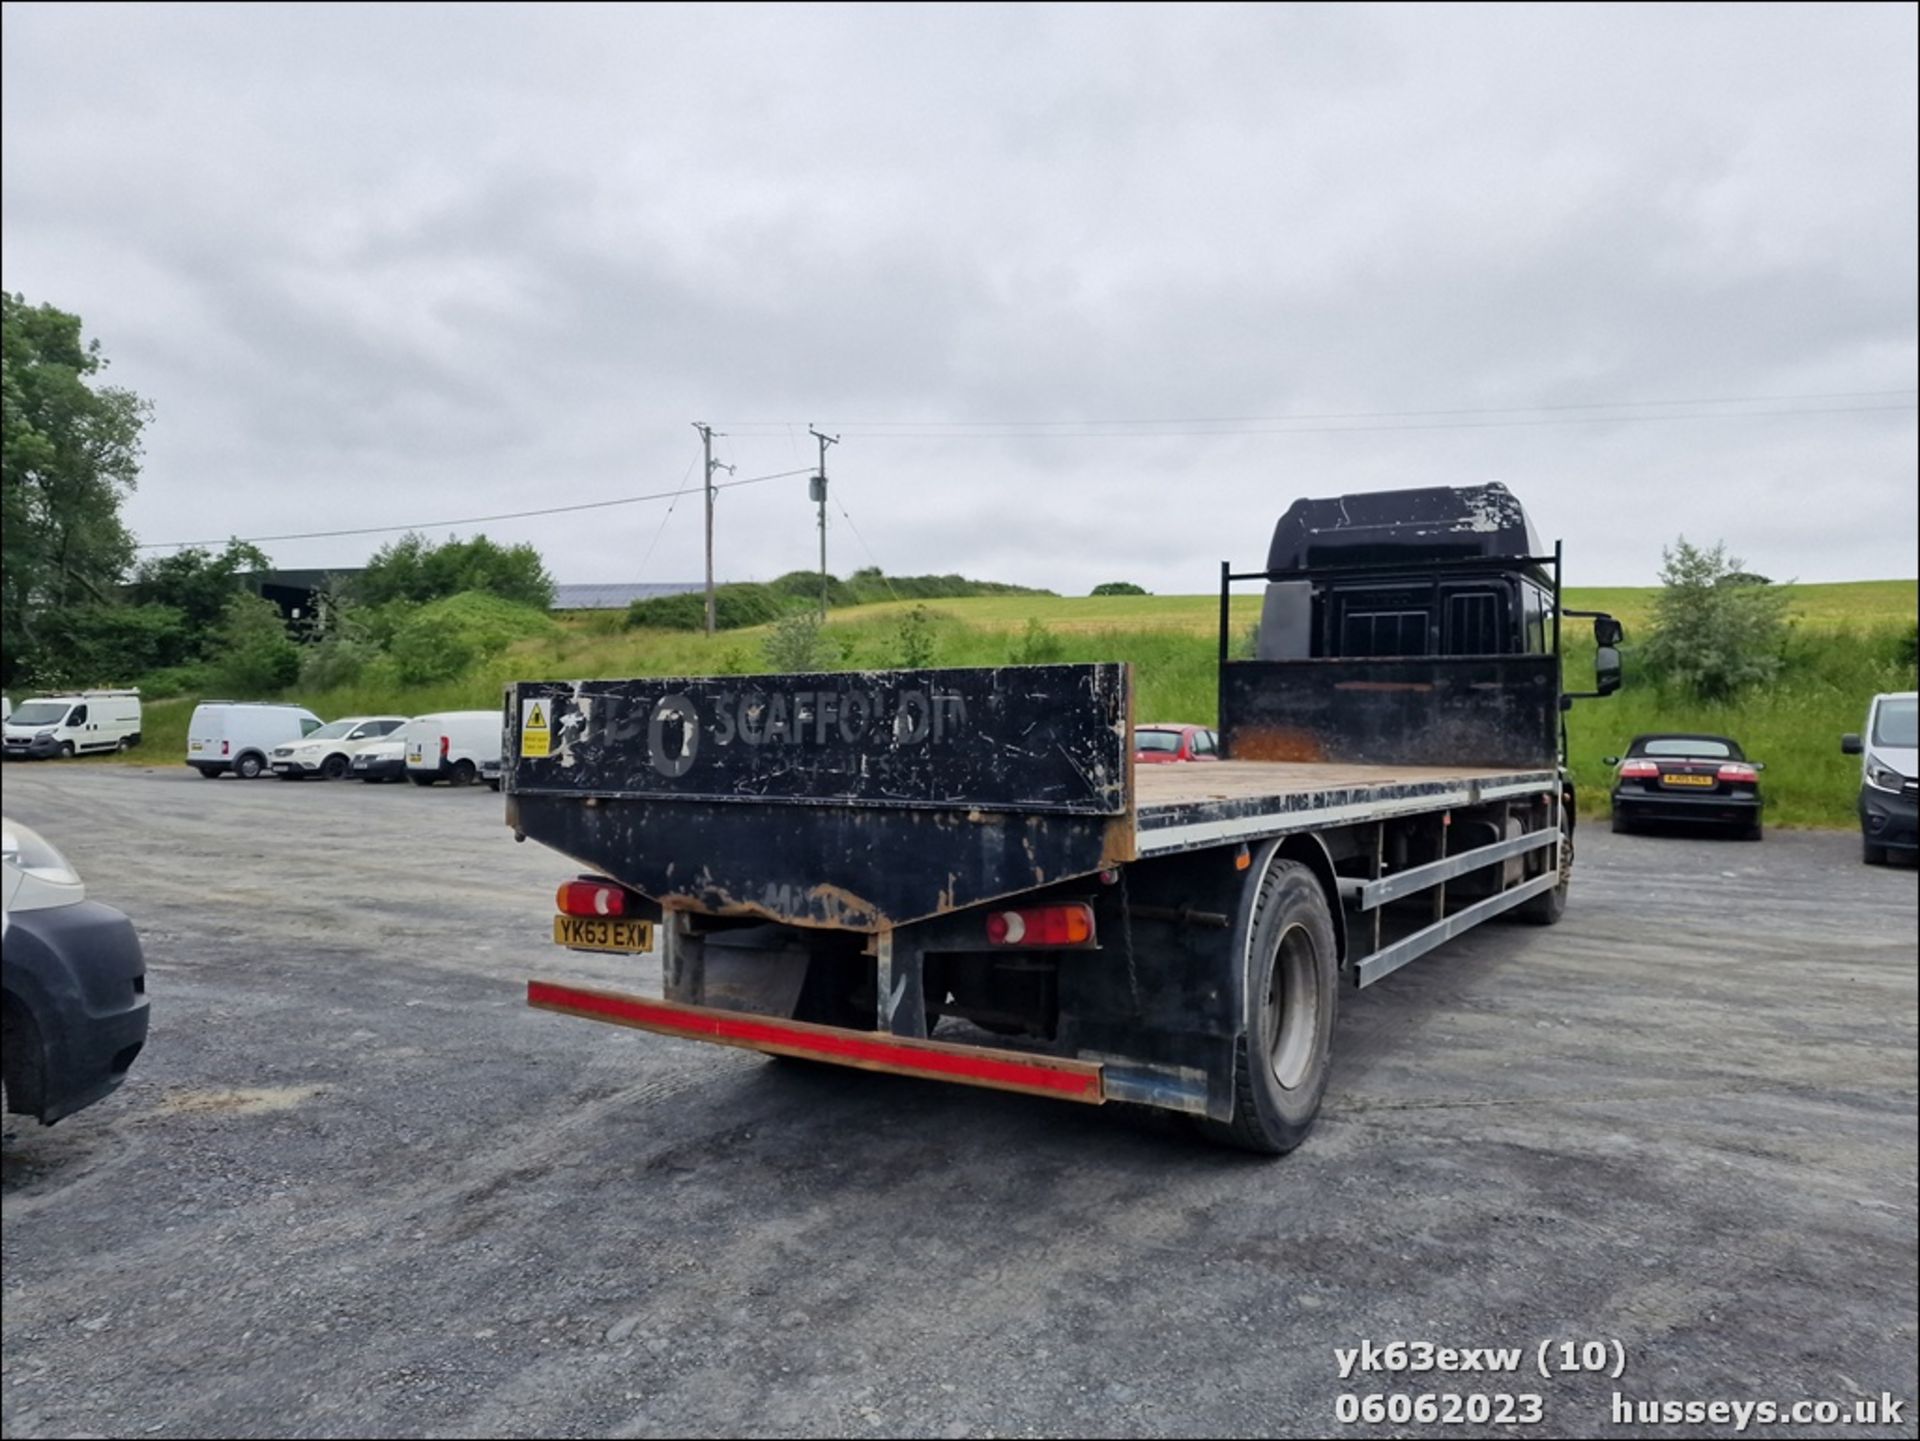 13/63 IVECO EUROCARGO (MY 2008) - 5880cc 2dr Flat Bed (Black) - Image 3 of 21